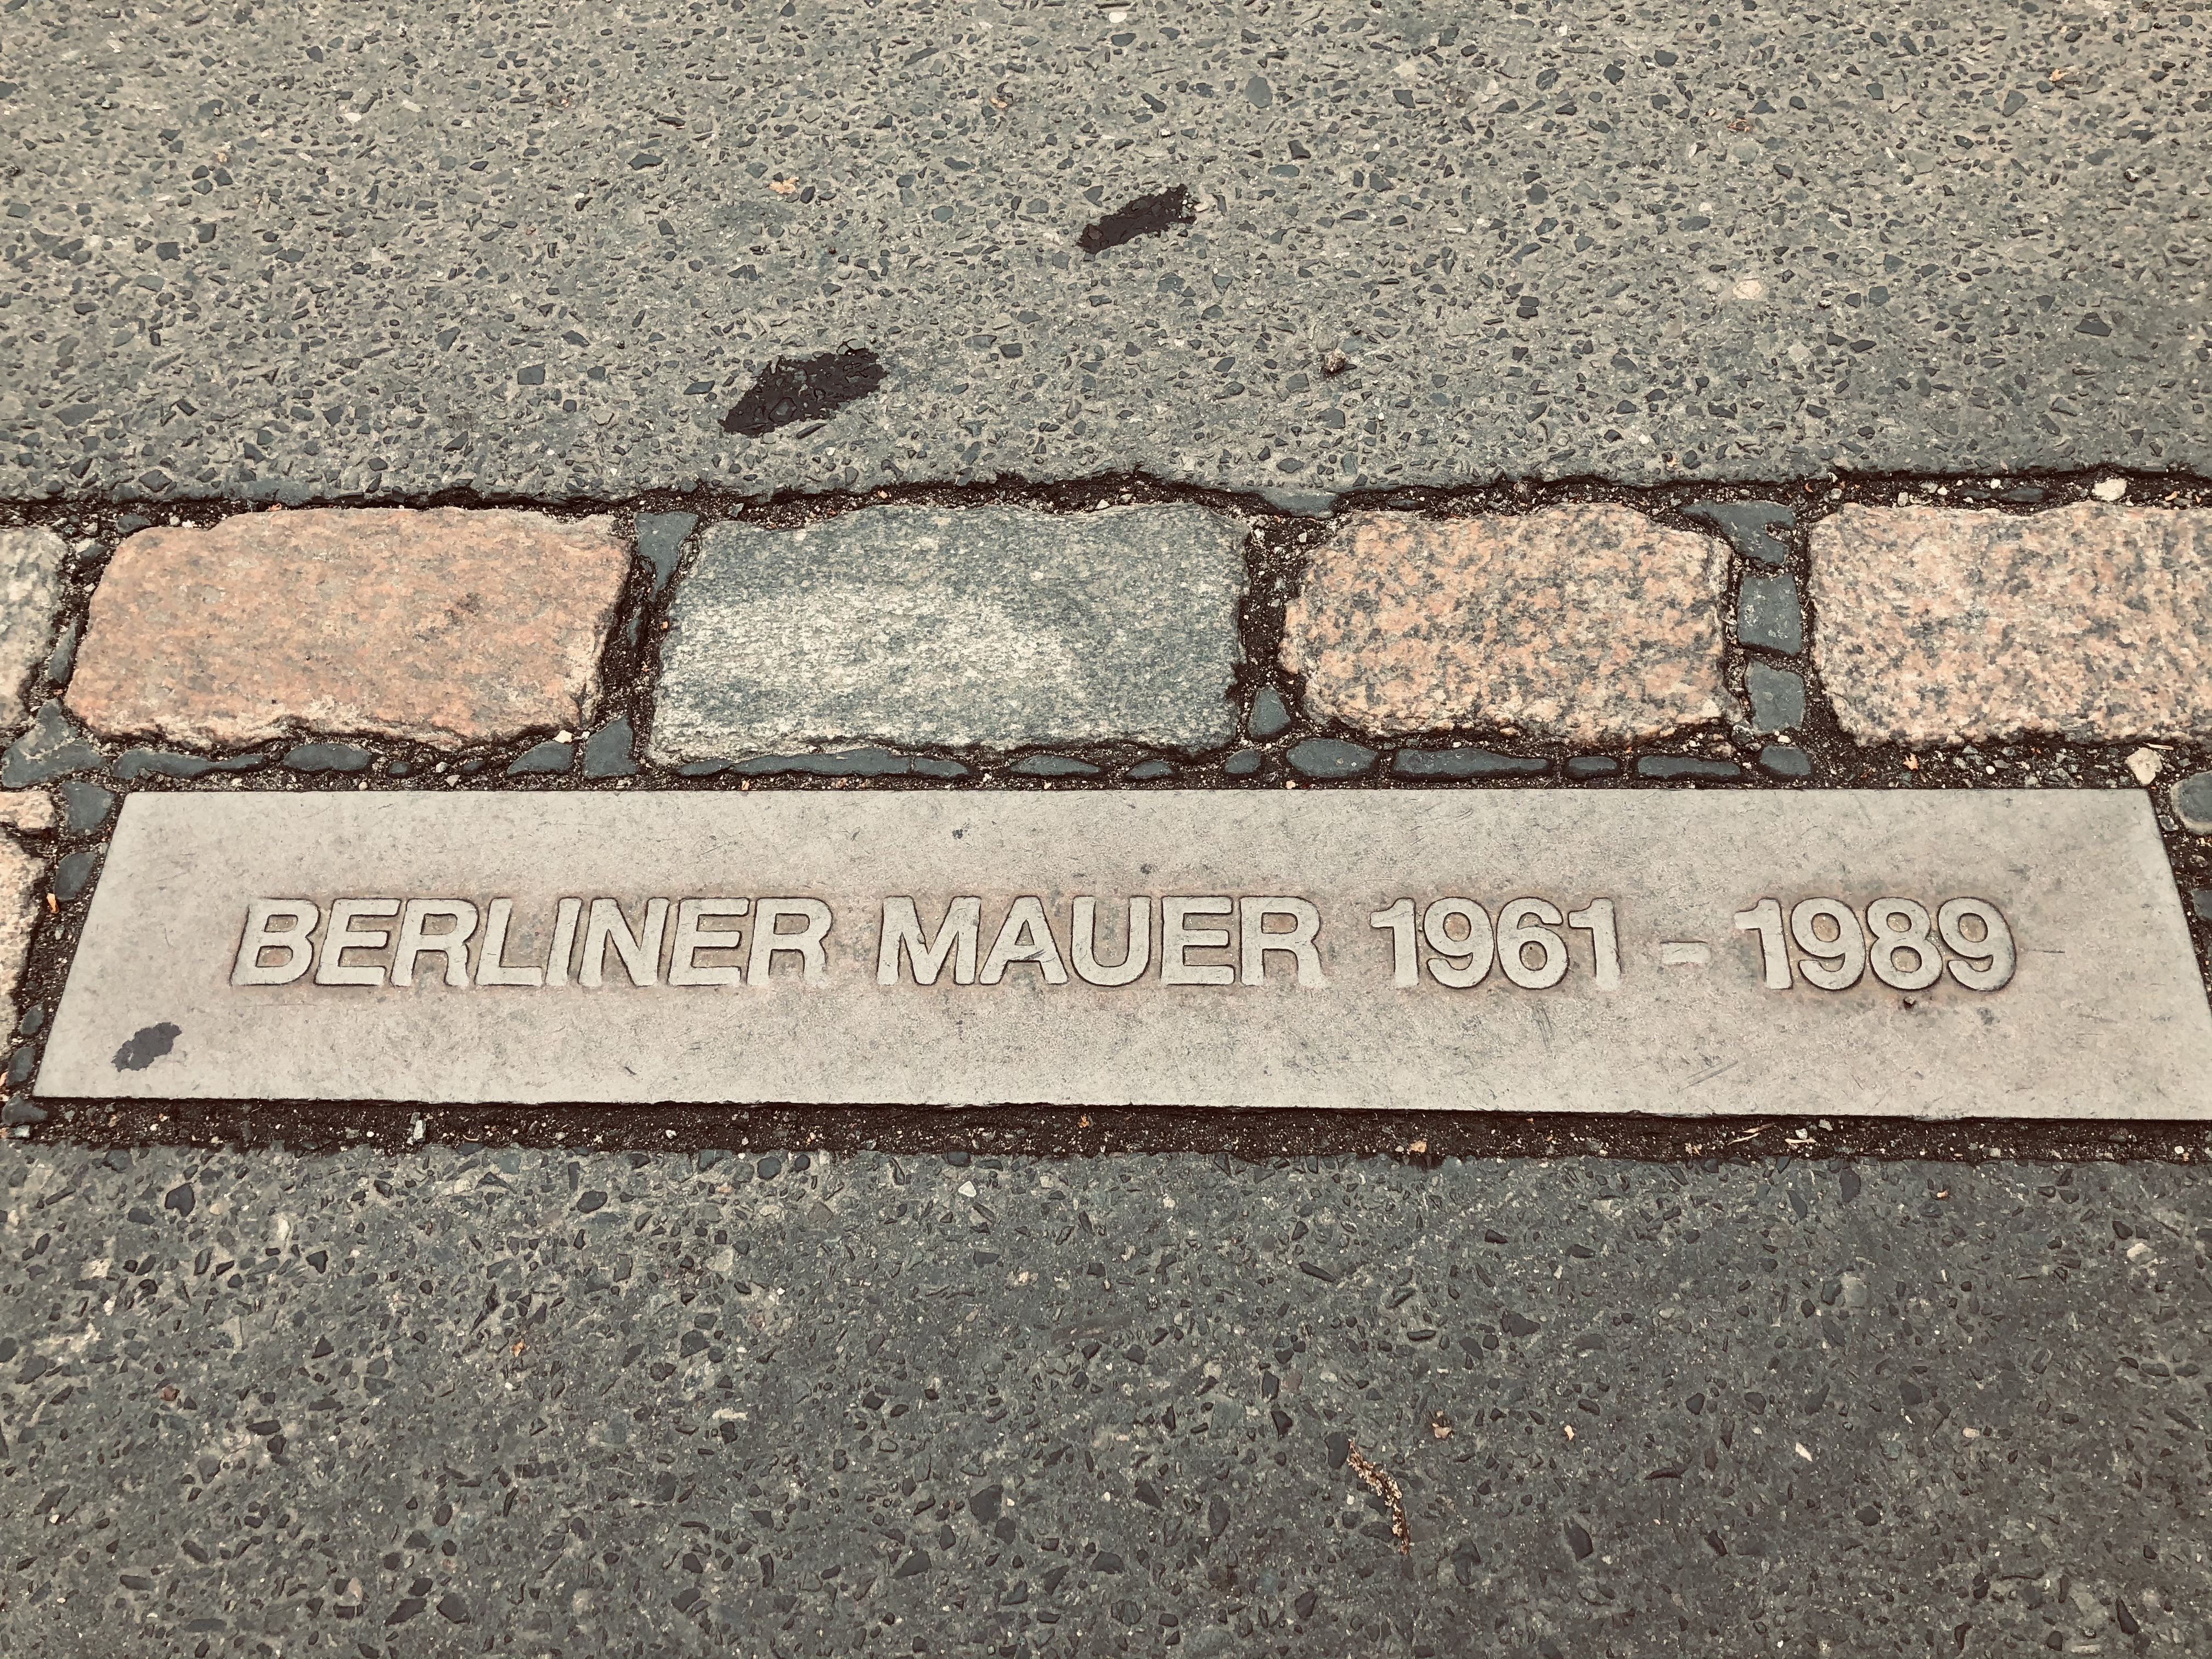 The plaque commemorating the Berlin wall stood along the double brick line from 1961-1989.